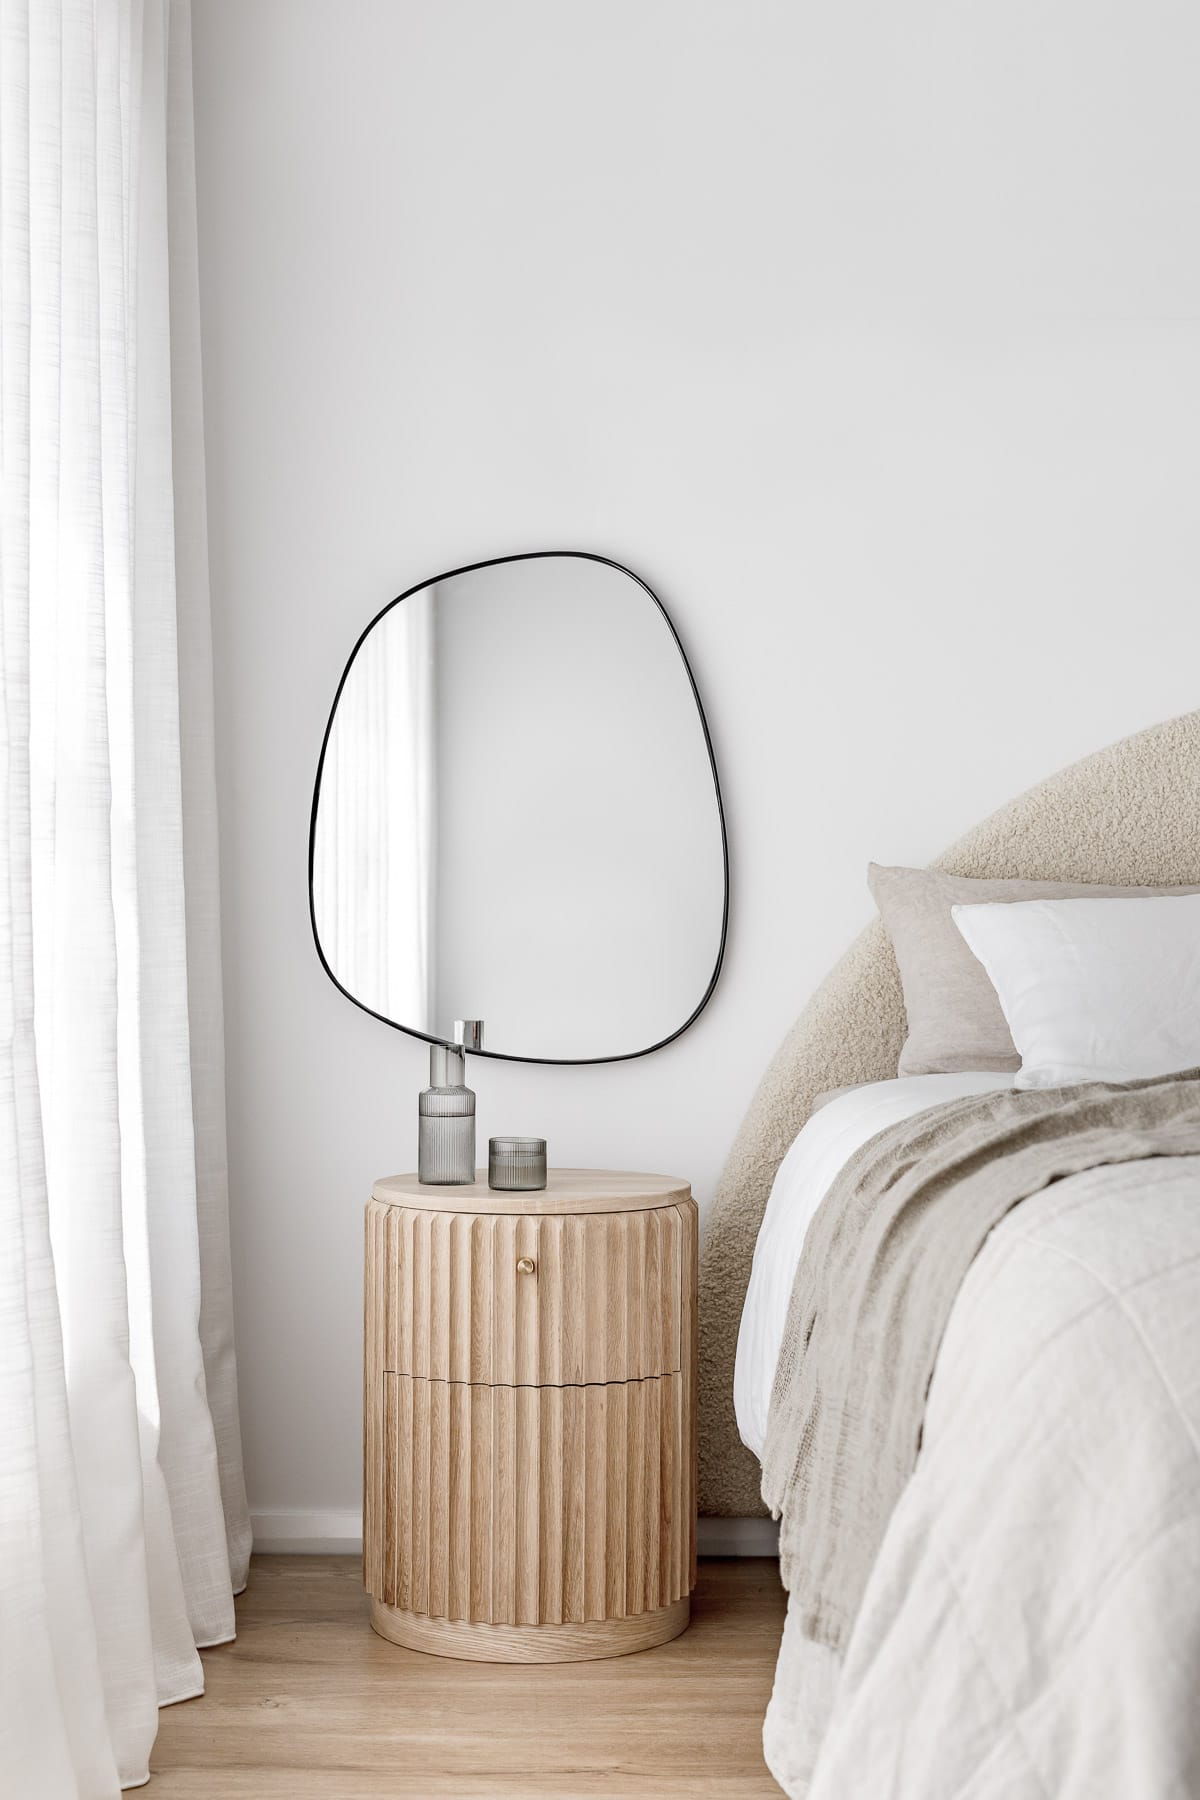 Showing the Underline Bedside Table by Hegi Design House styled in a bedroom